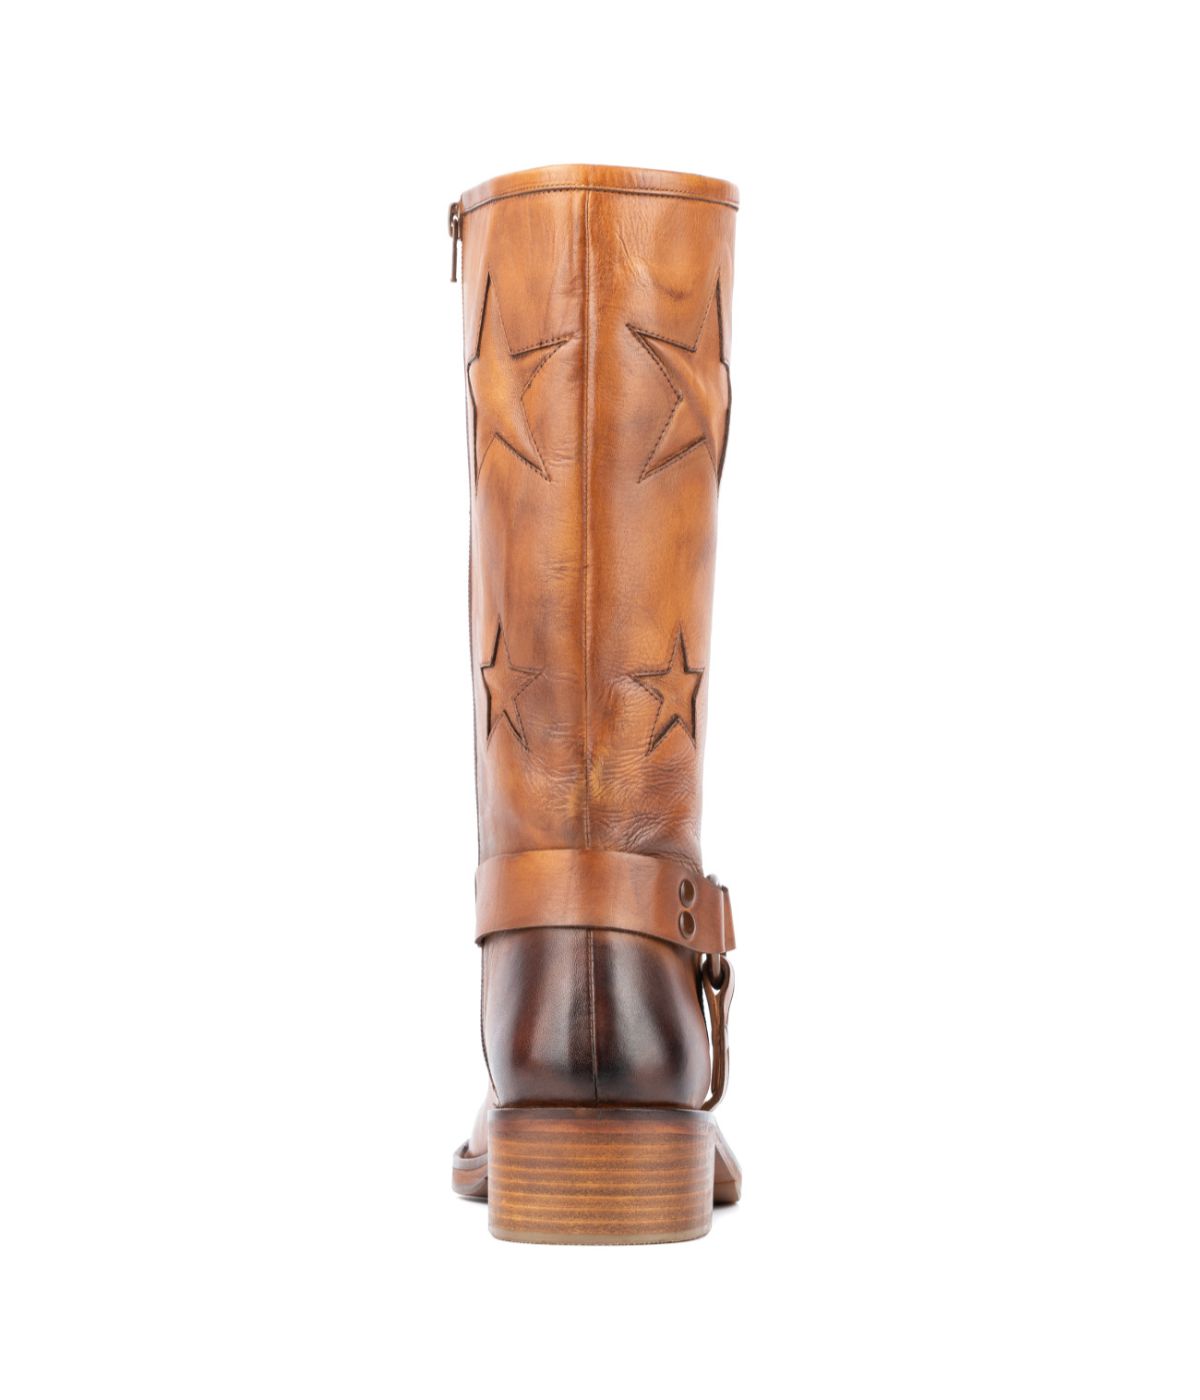 Vintage Foundry Co. Women's Mathilde Mid Calf Boots Tan